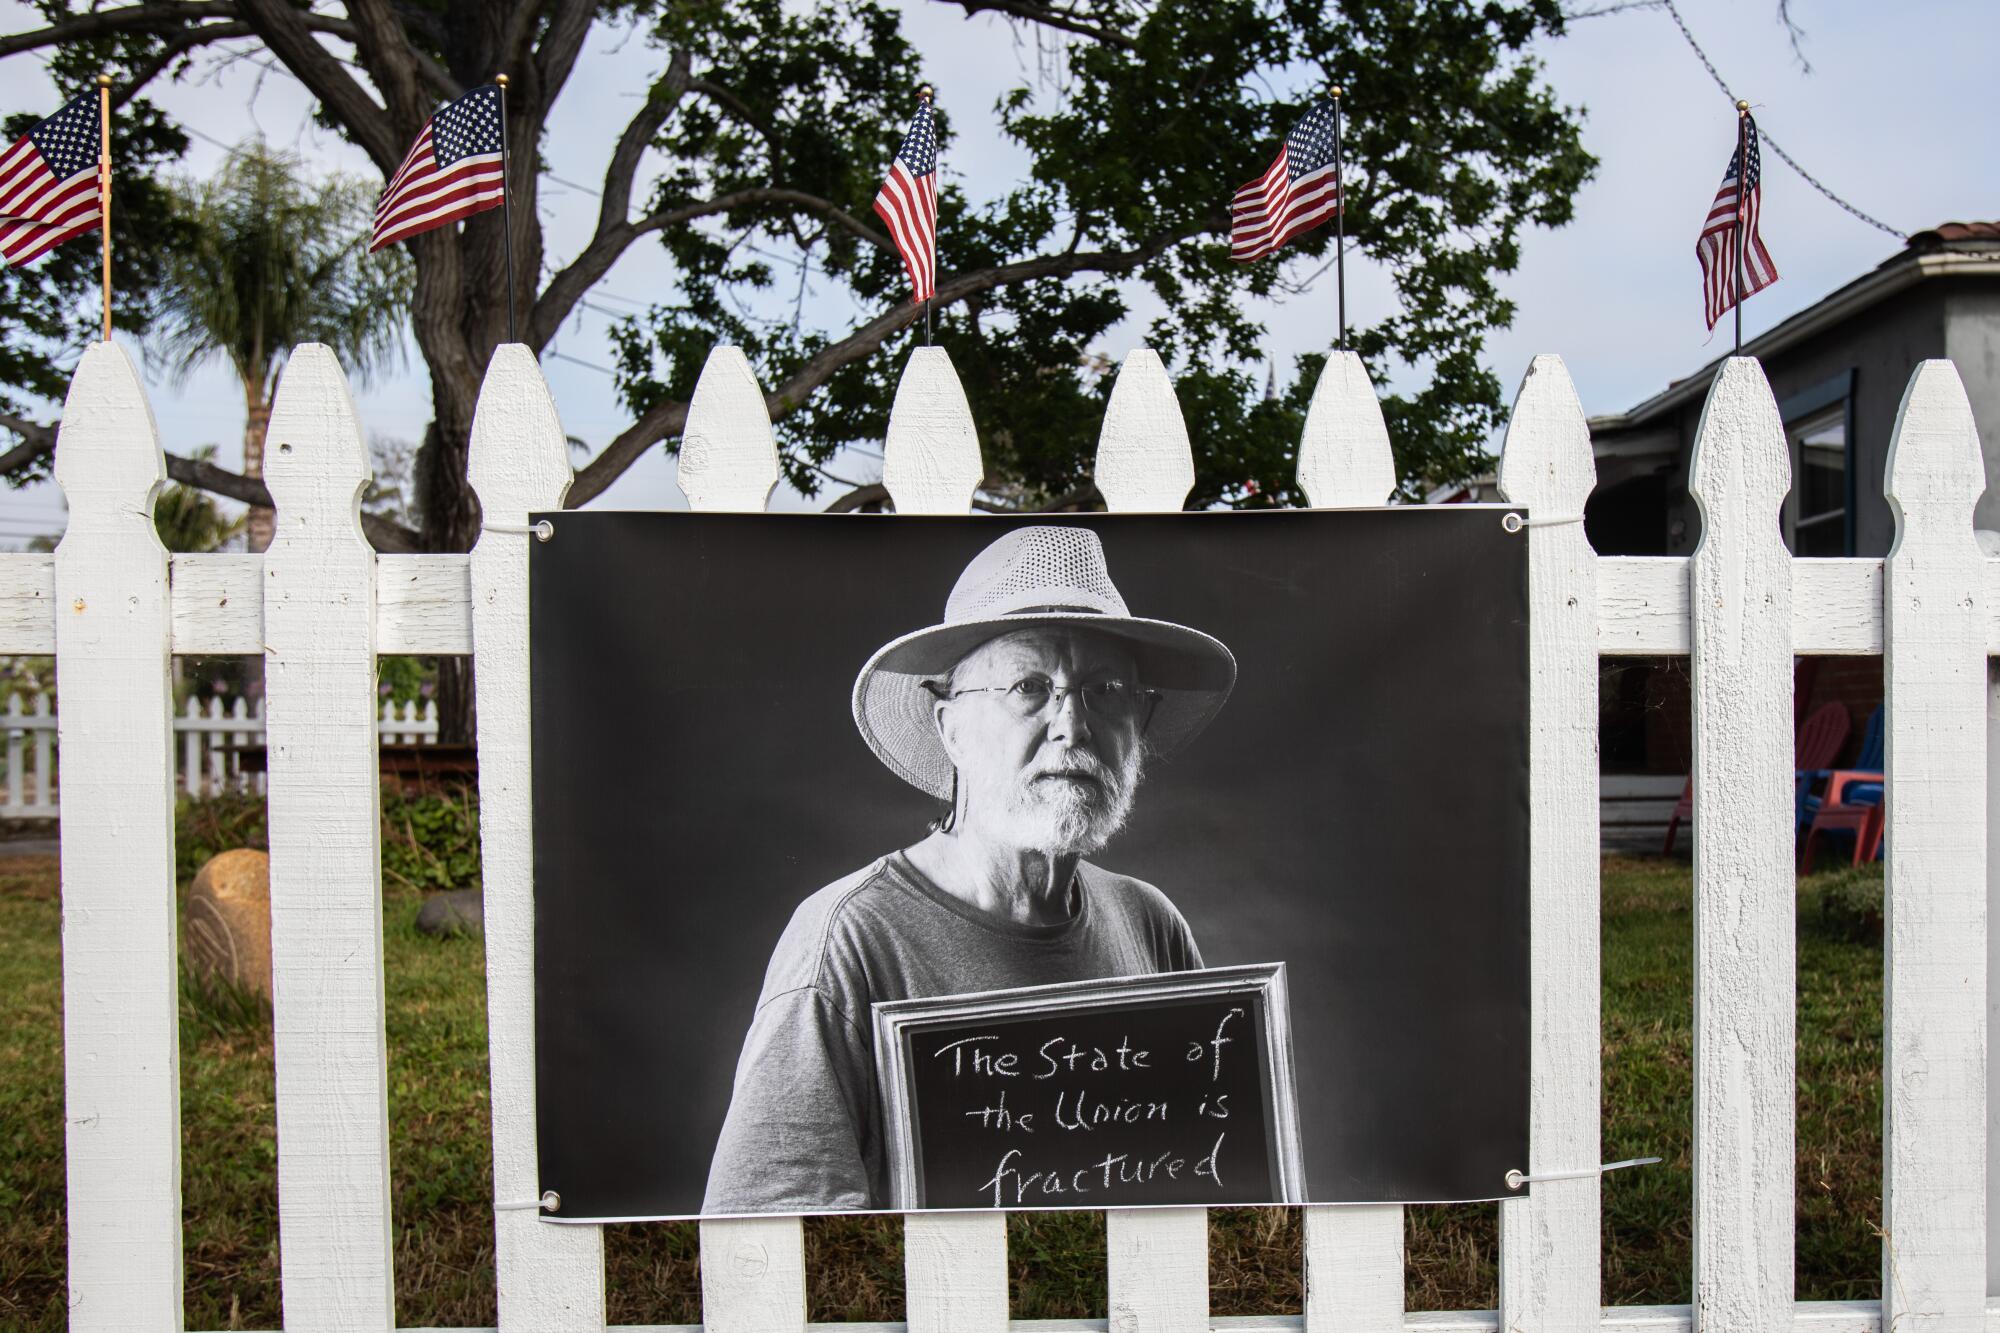 A black and white portrait of a man is hung on a fence 